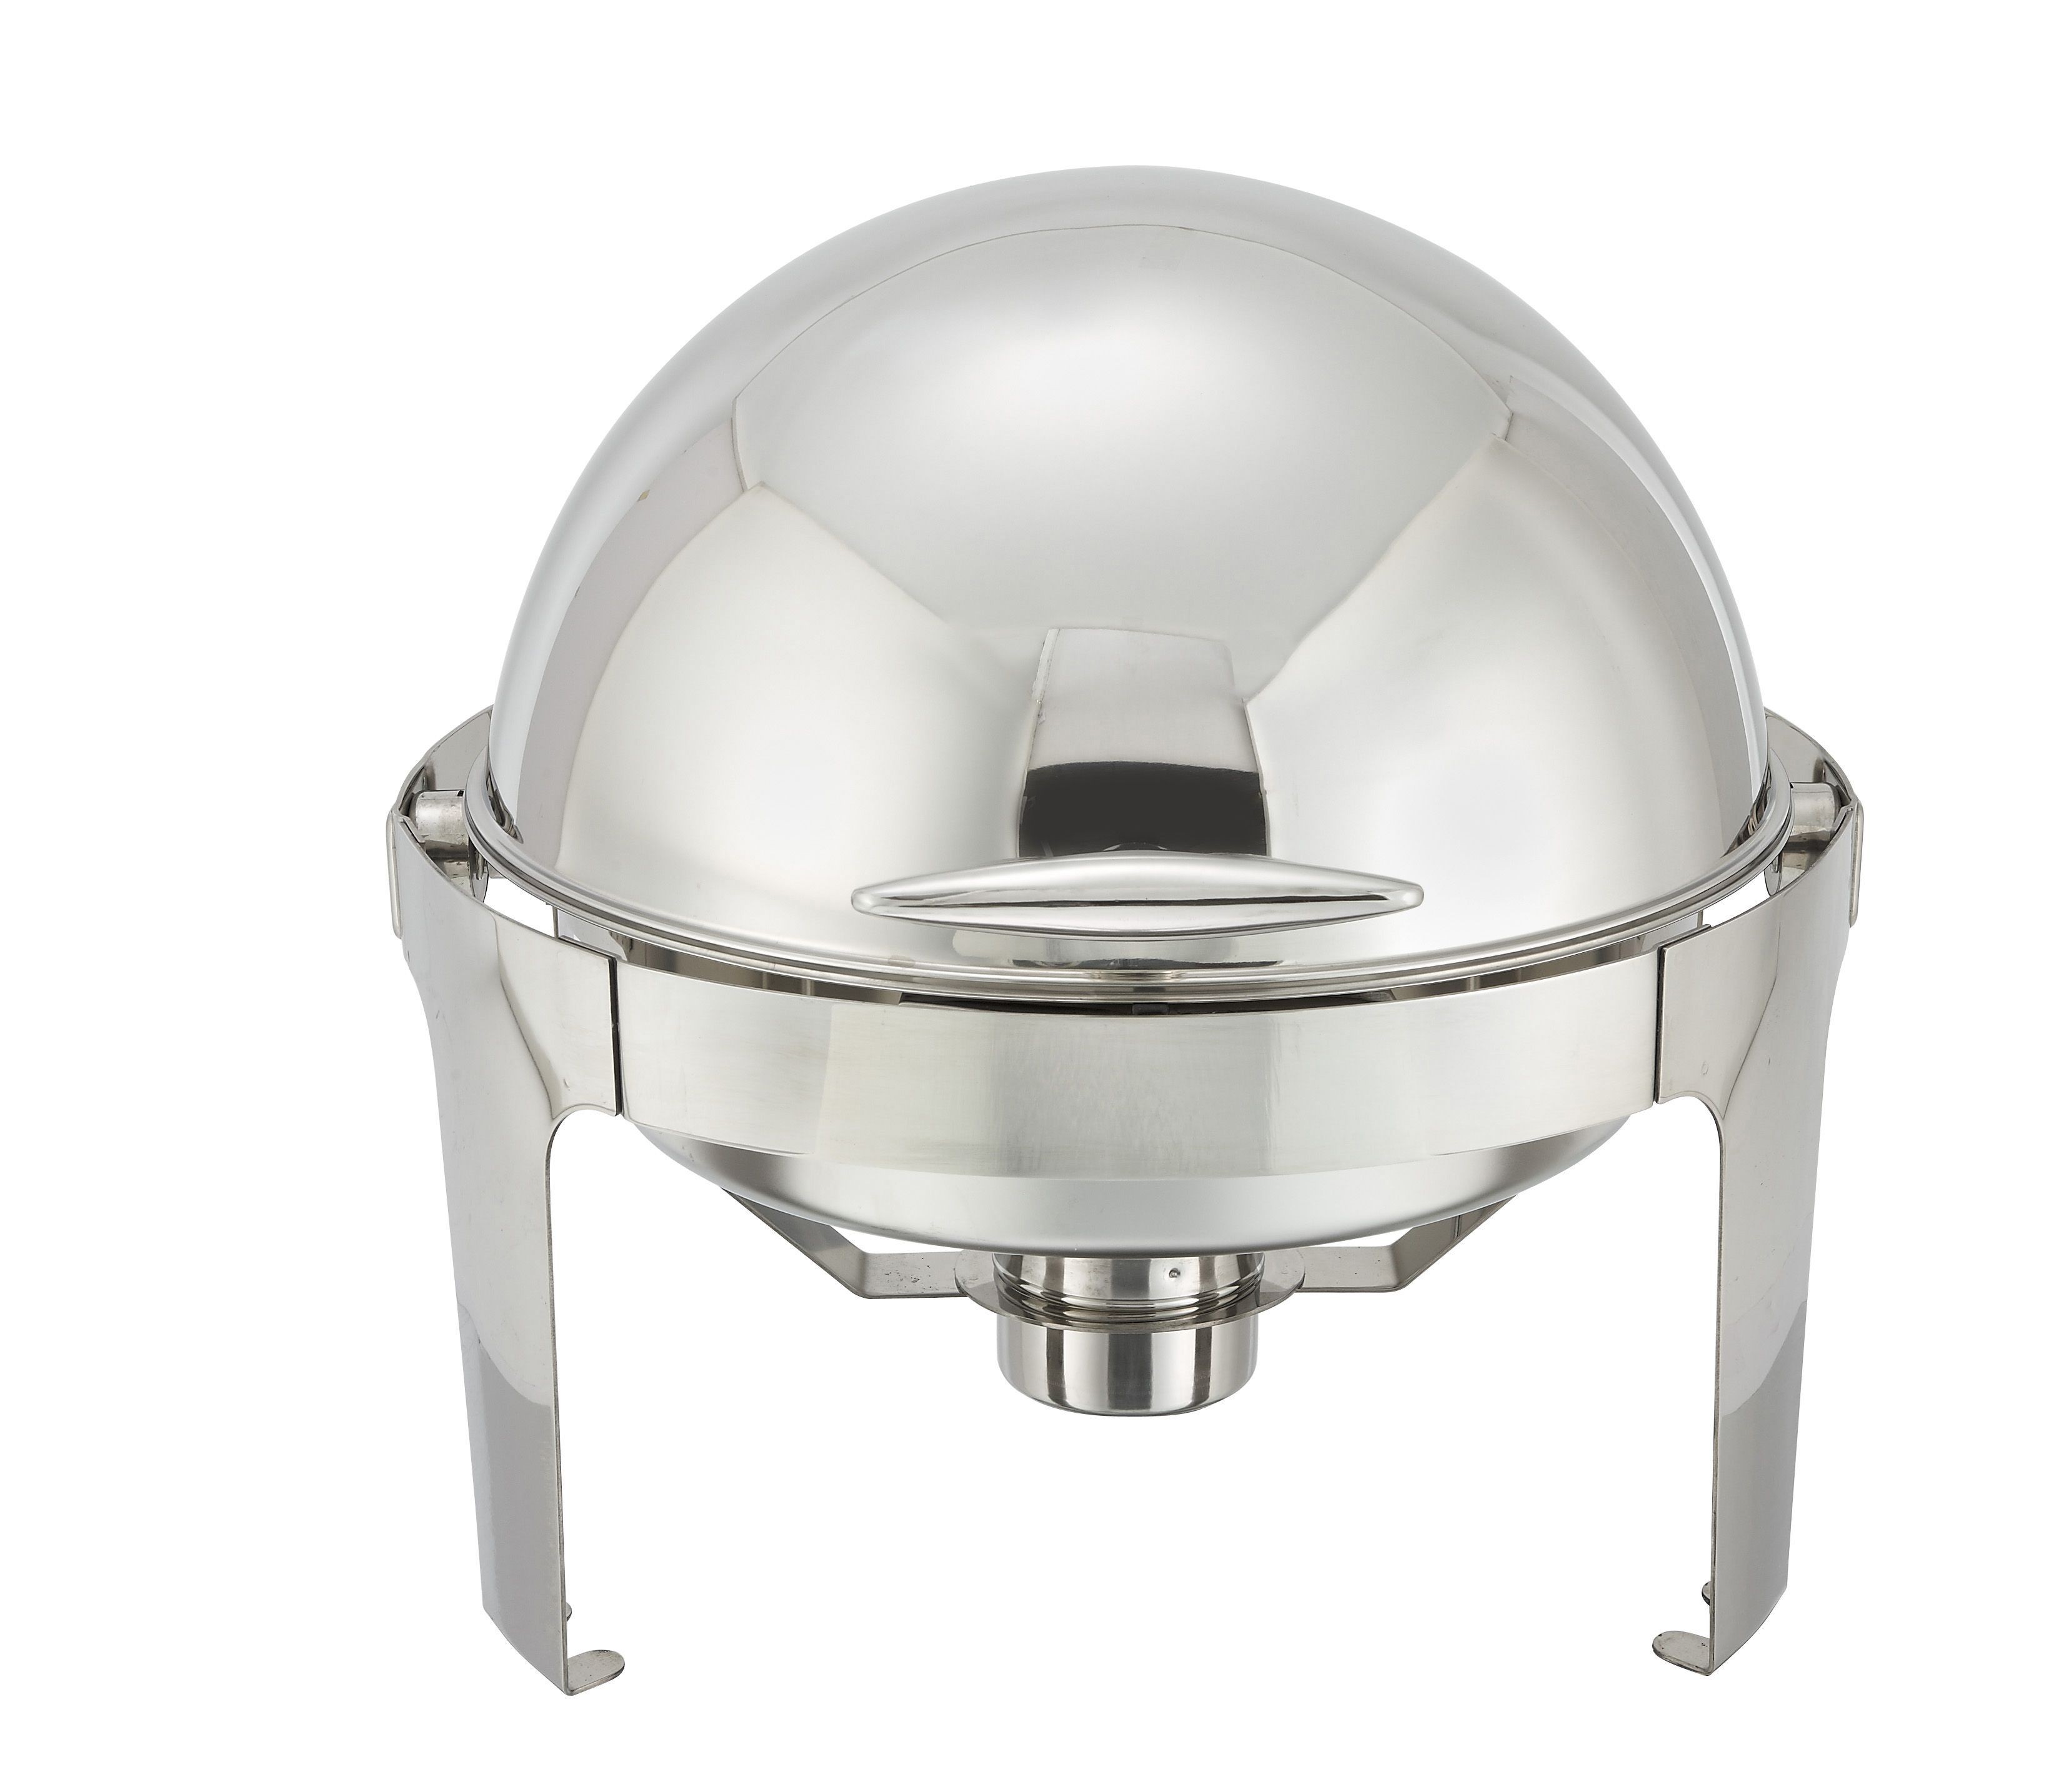 LionsDeal Round 6 Qt. Roll Top Chafing Dish - LionsDeal Chafing Dish Round Stainless Steel